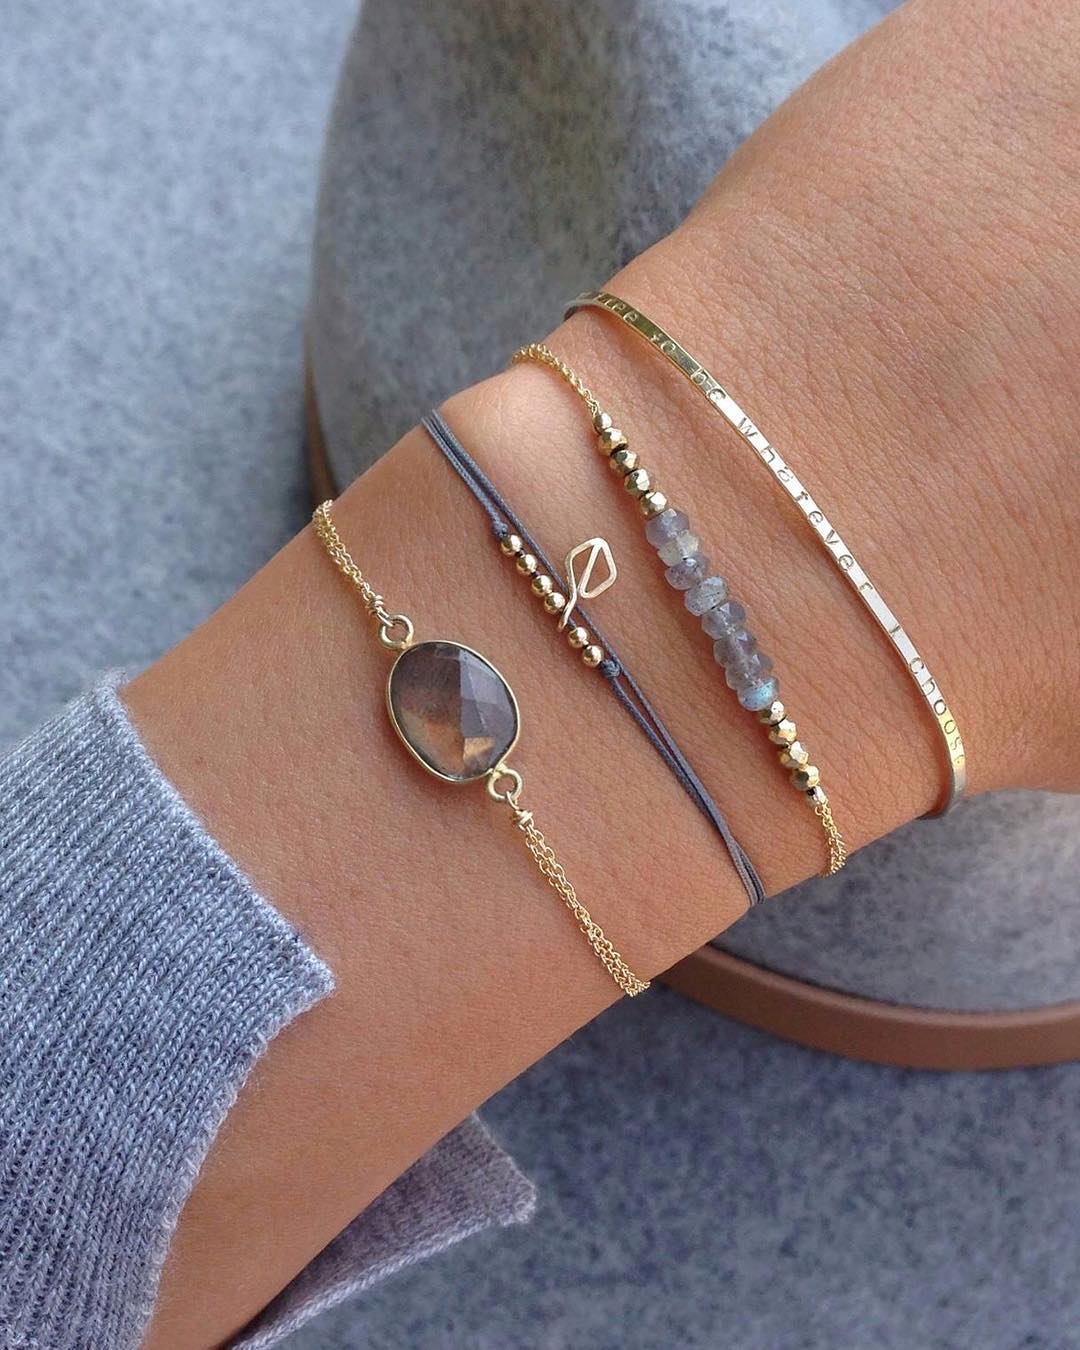 5 Streetstyle Jewelry Trend: Sparkling Golden Bangles